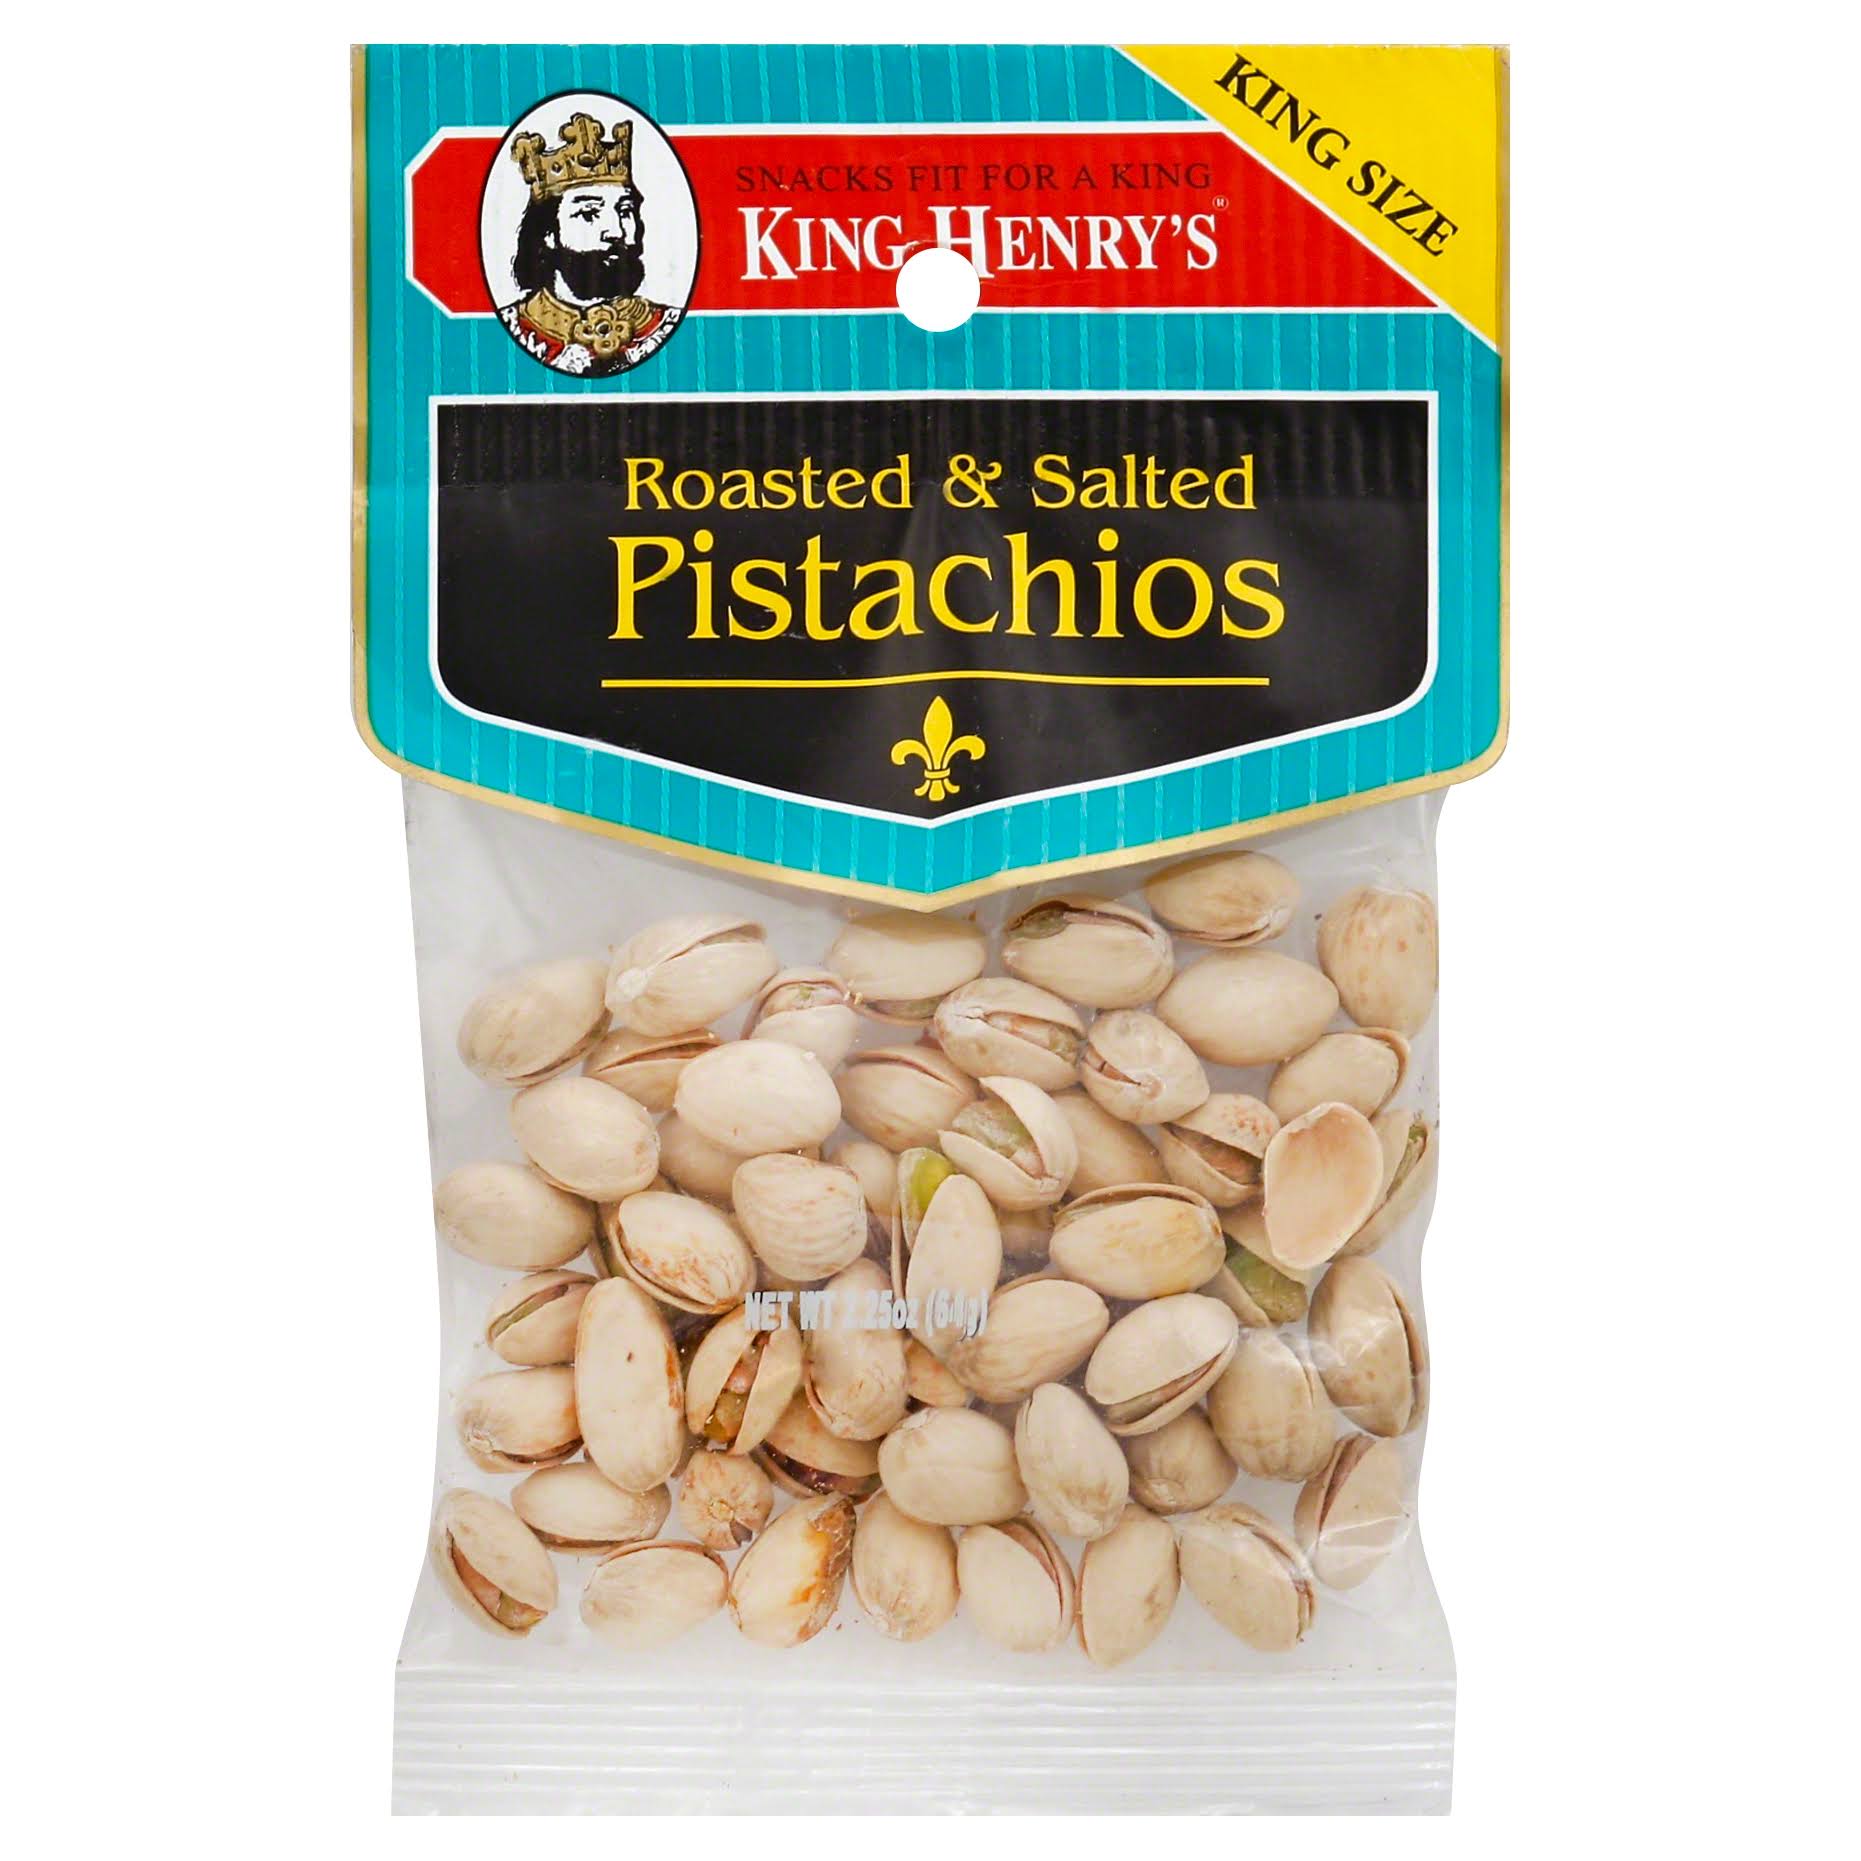 King Henrys Pistachios, Roasted & Salted, King Size - 2.25 oz